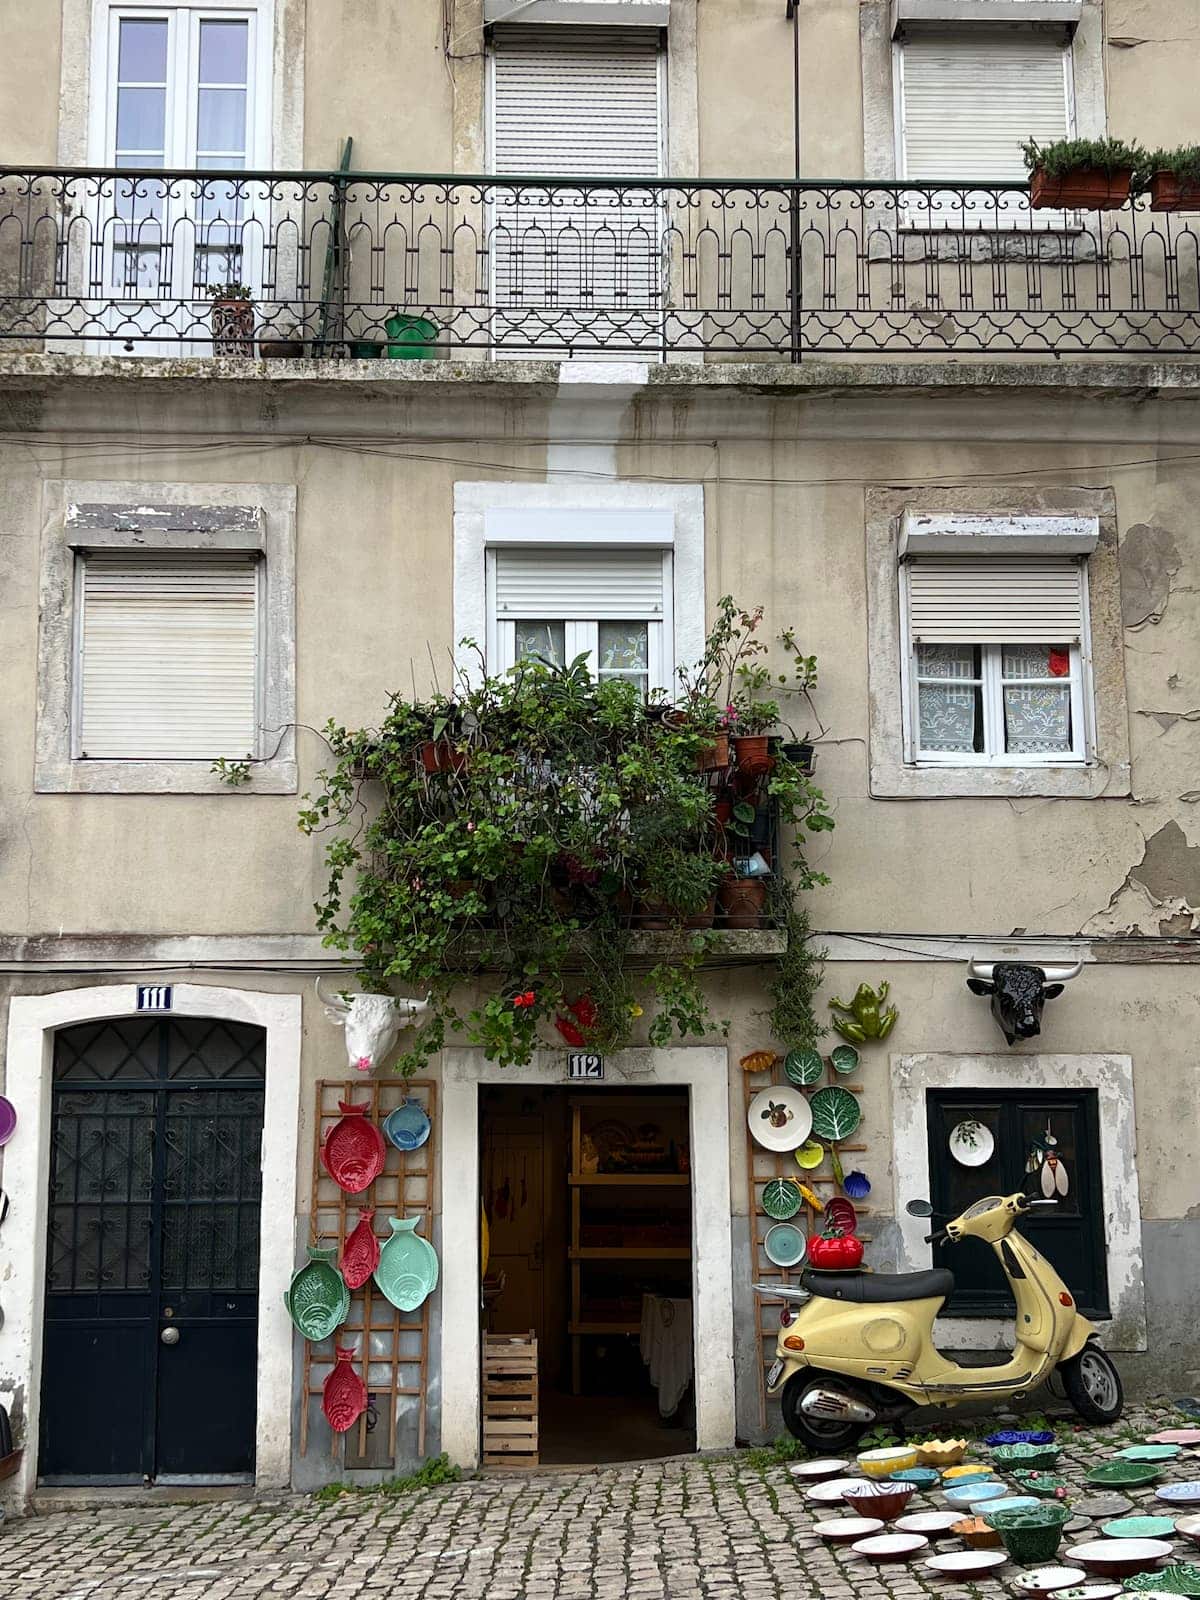 Building front in Lisbon. Photo by Sadia Maqsood